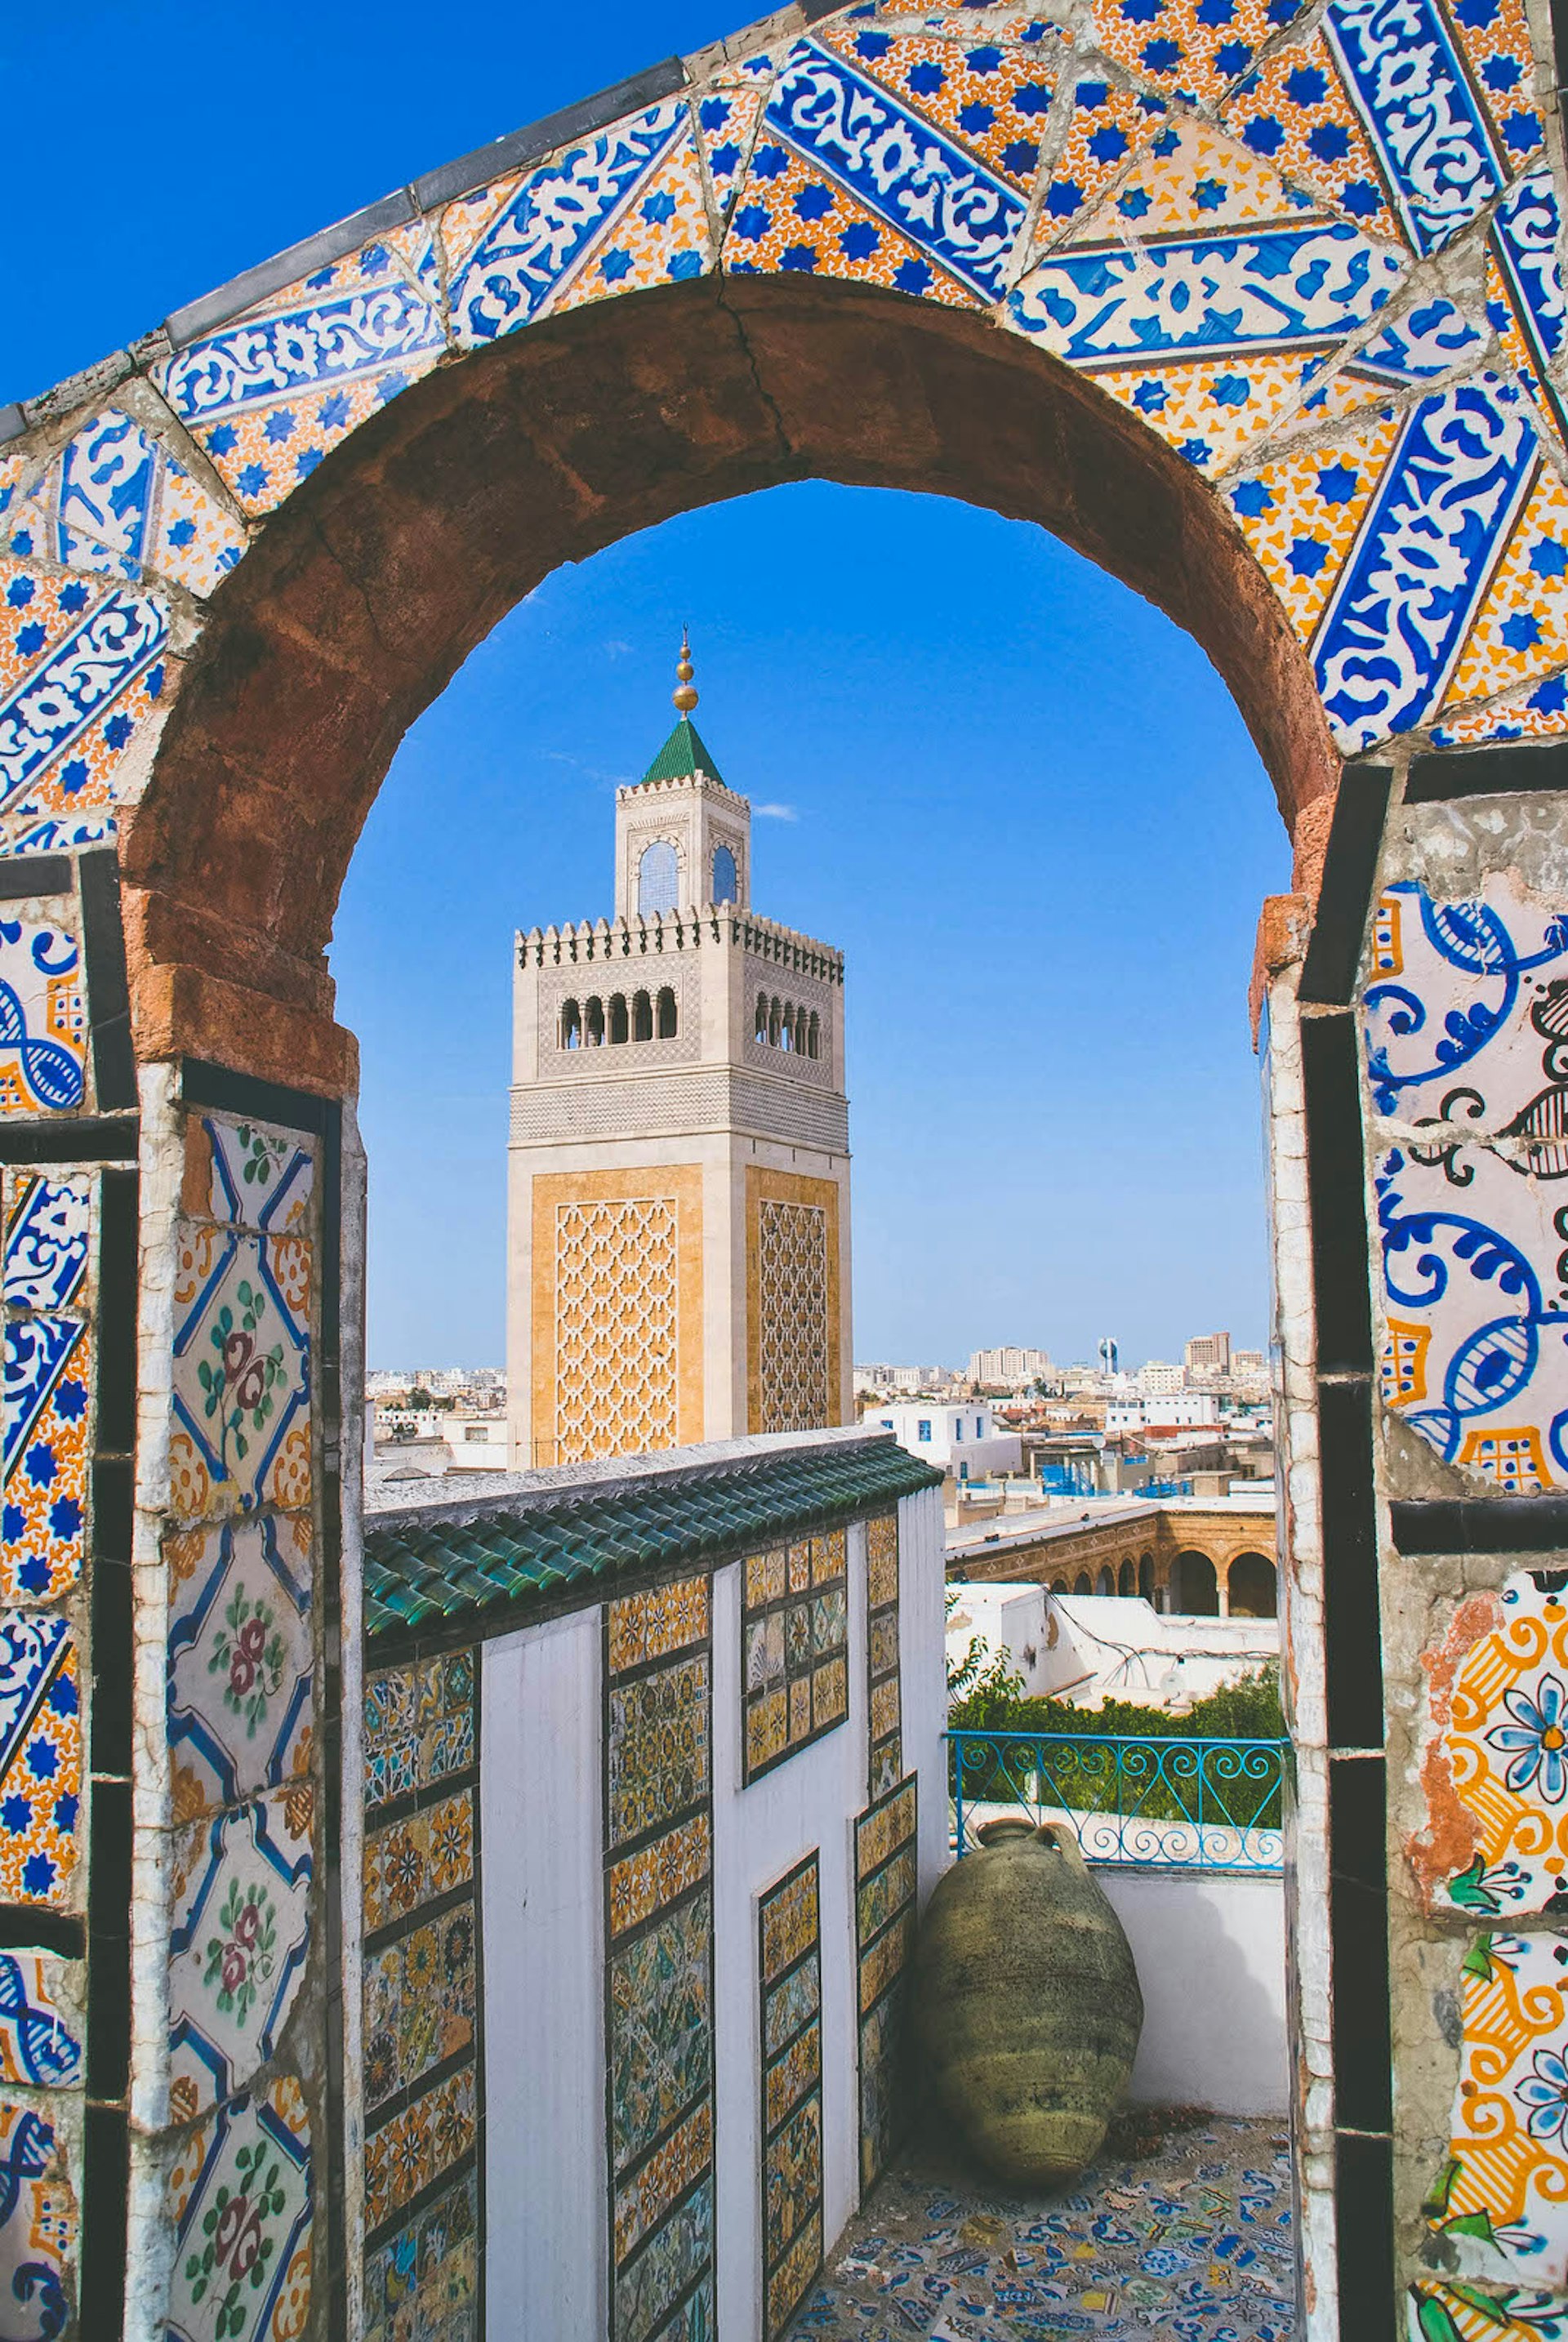 Terrace covered in mosaics in the medina in Tunis, Tunisia